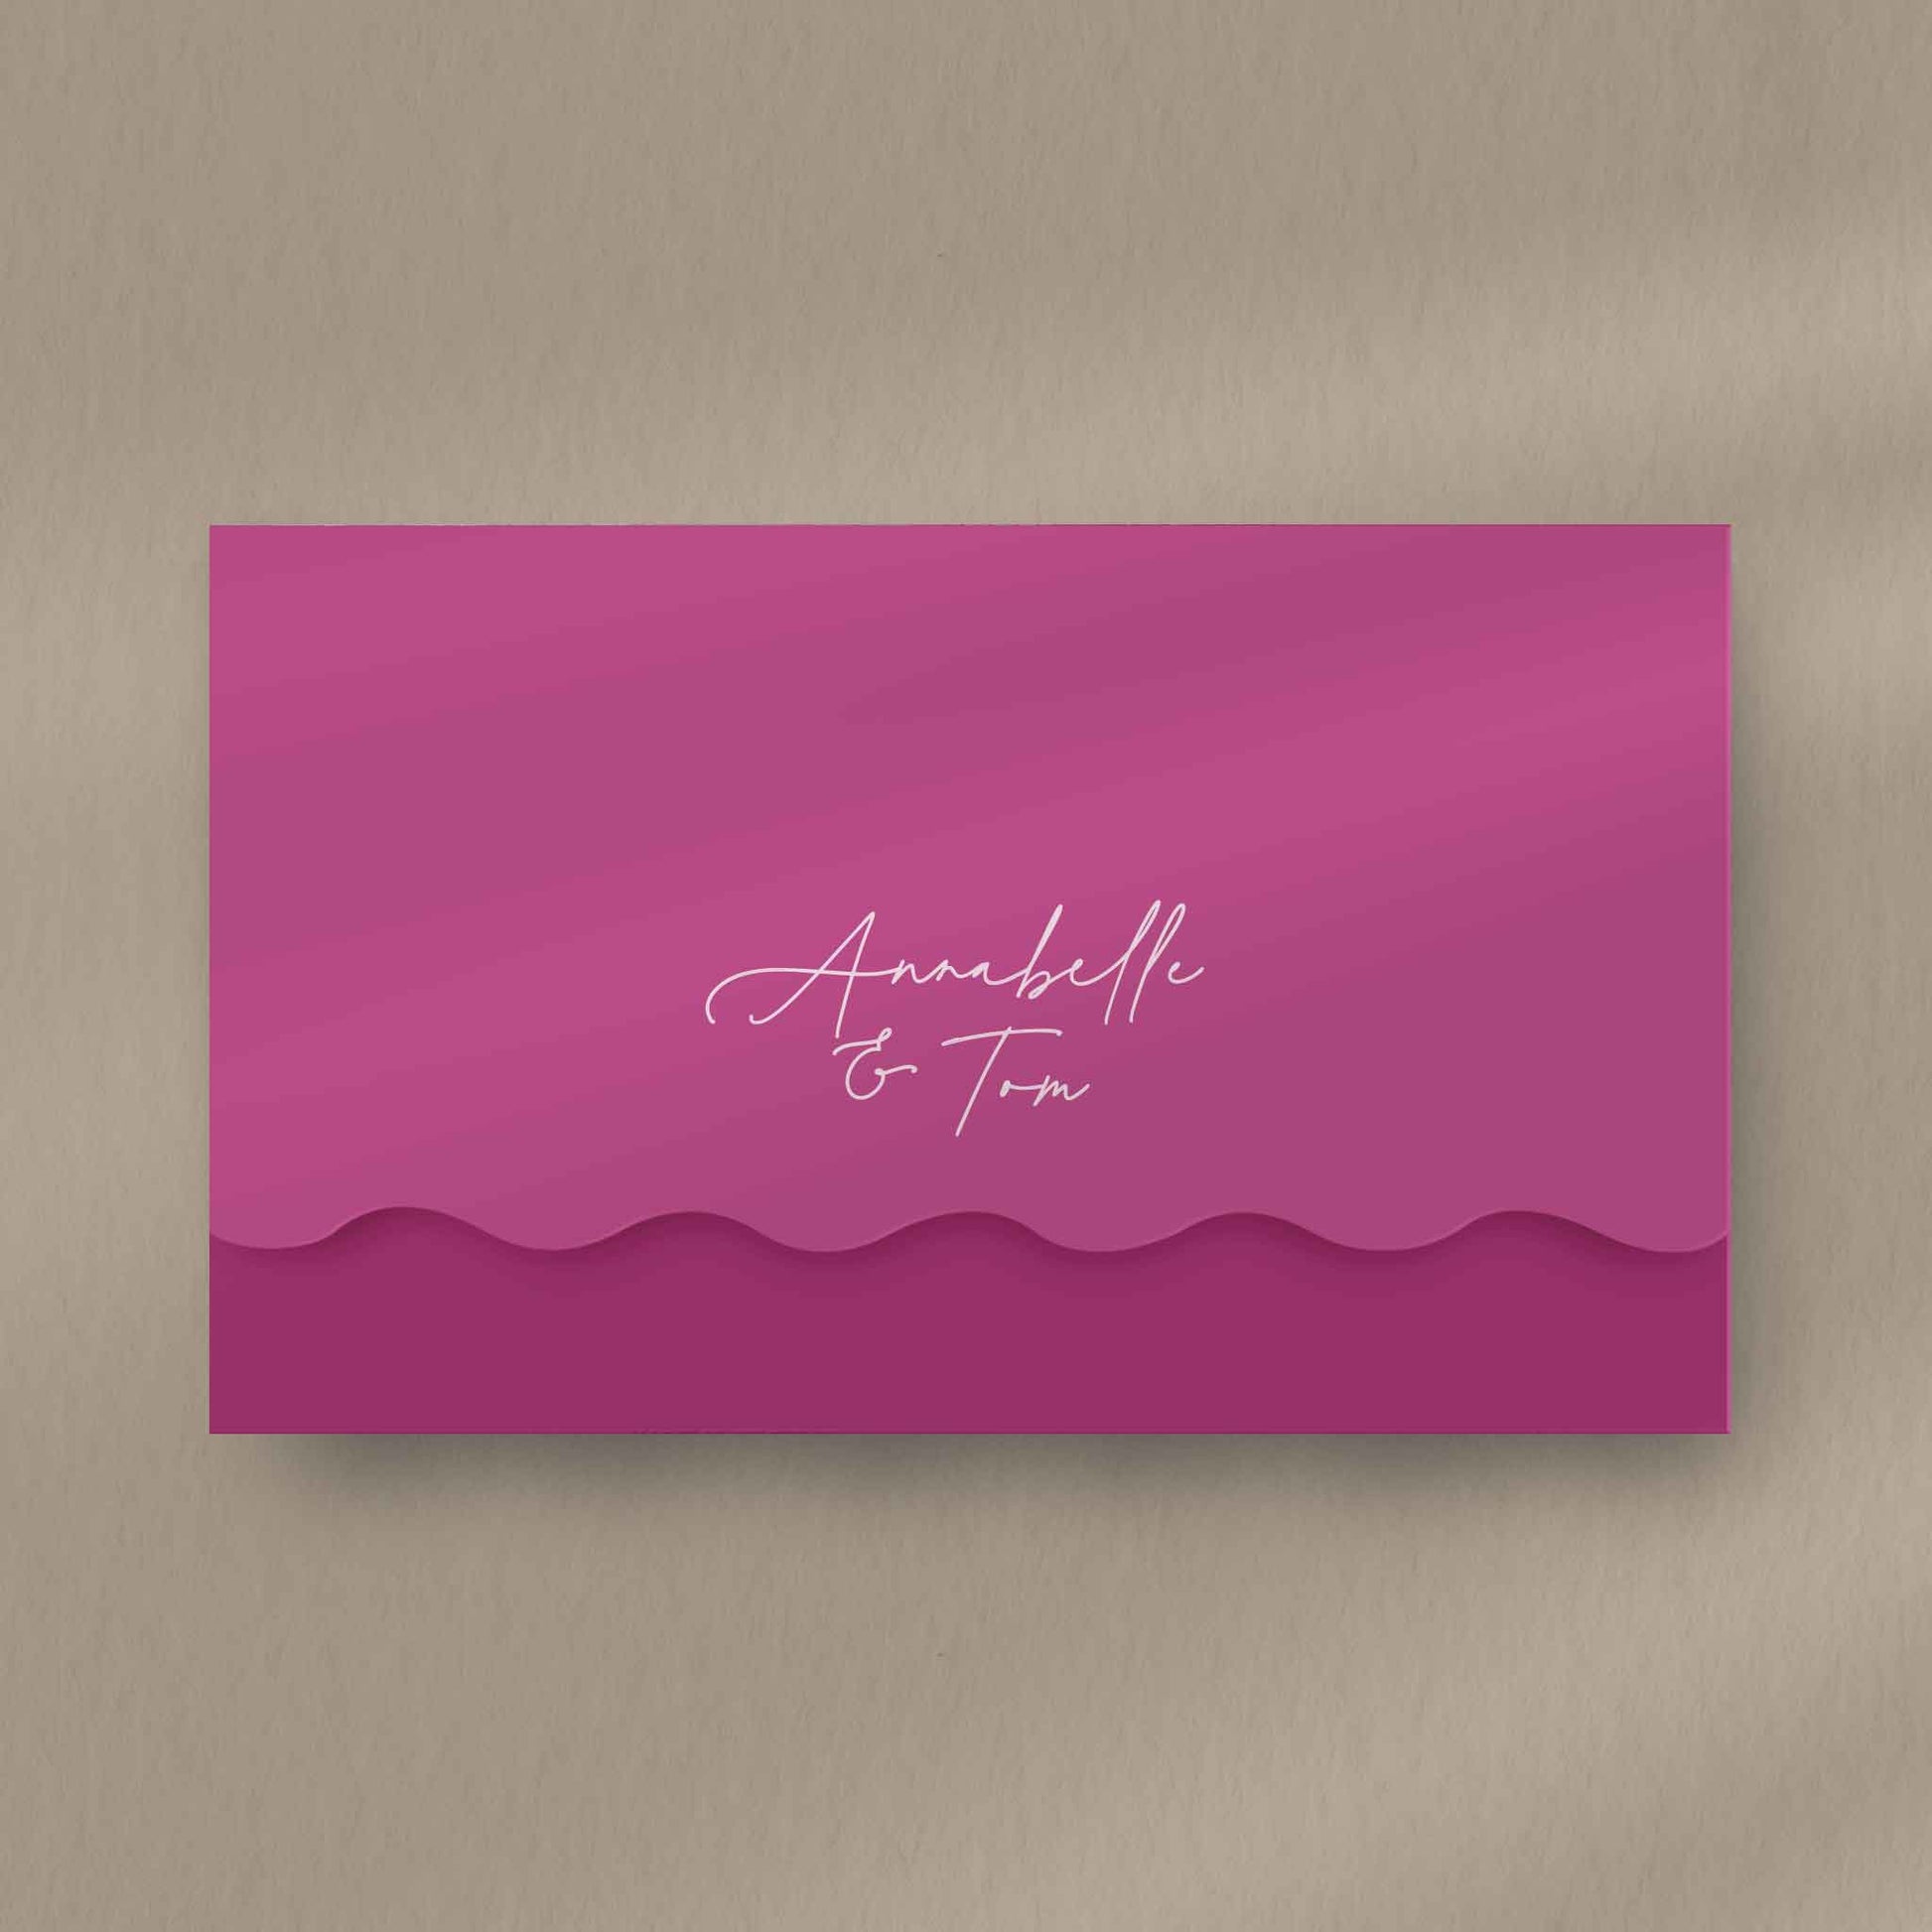 Annabelle Scallop Envelope Invite  Ivy and Gold Wedding Stationery   